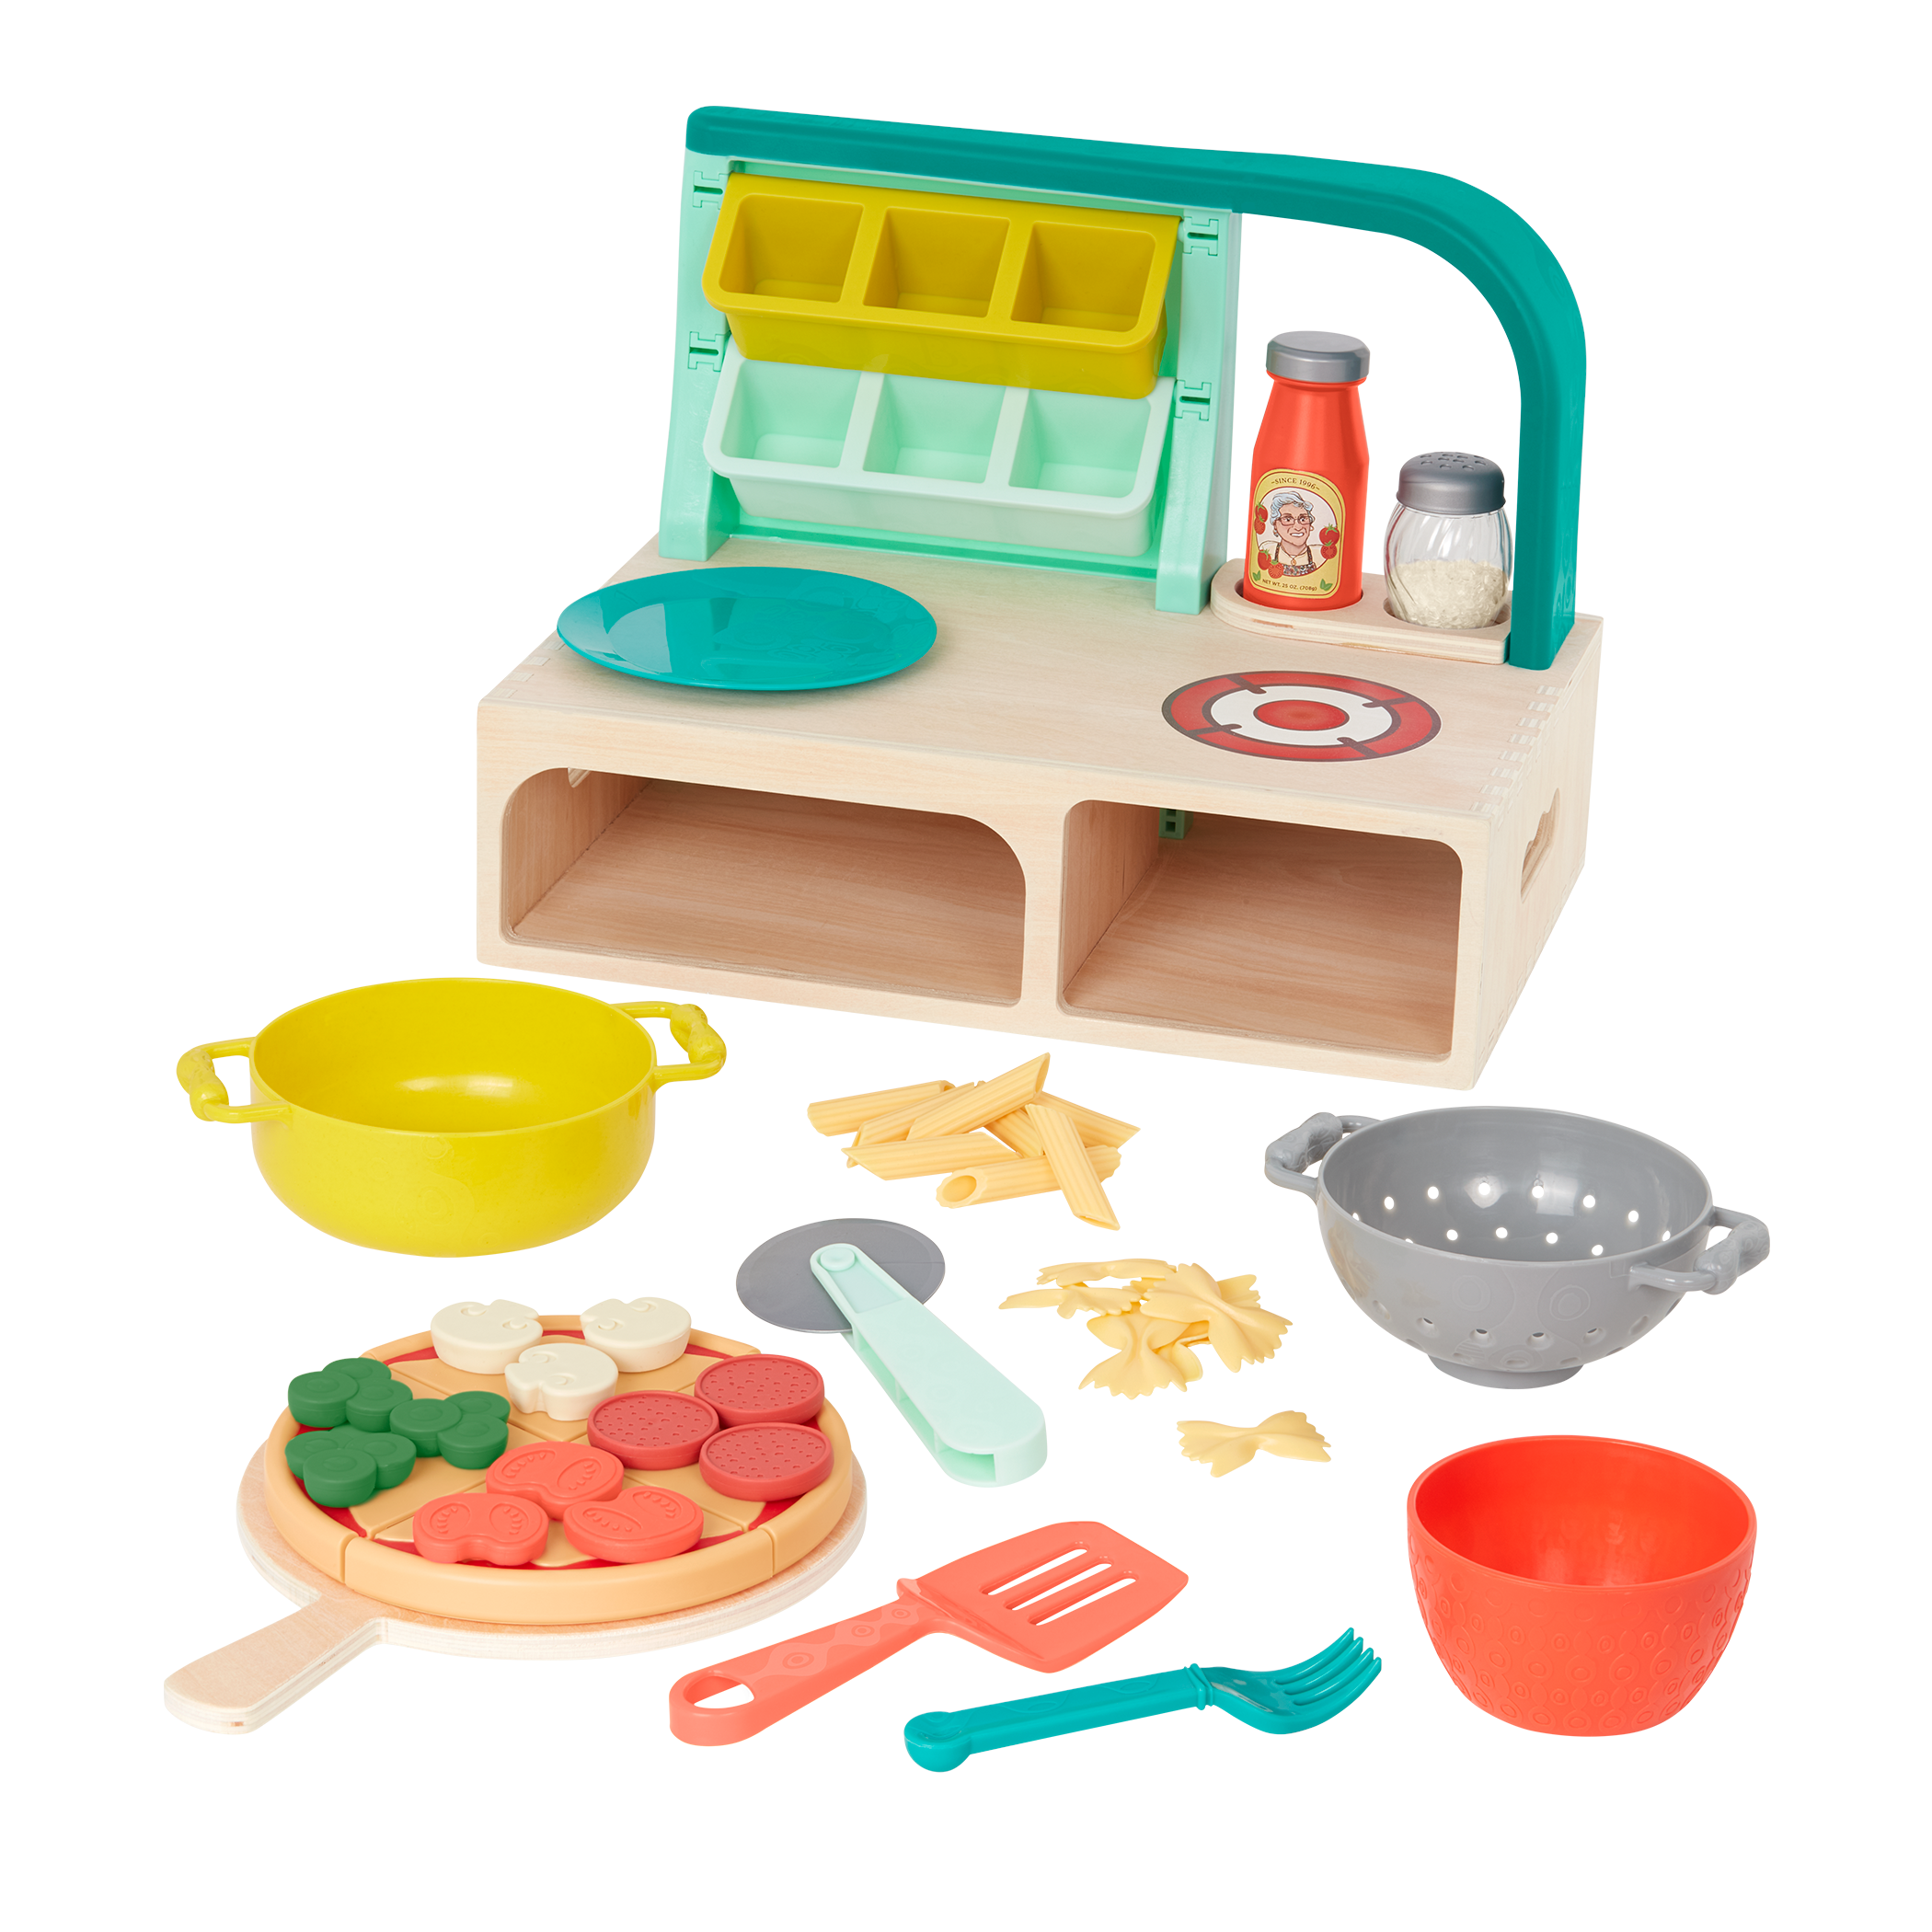 Pizza and pasta play set.